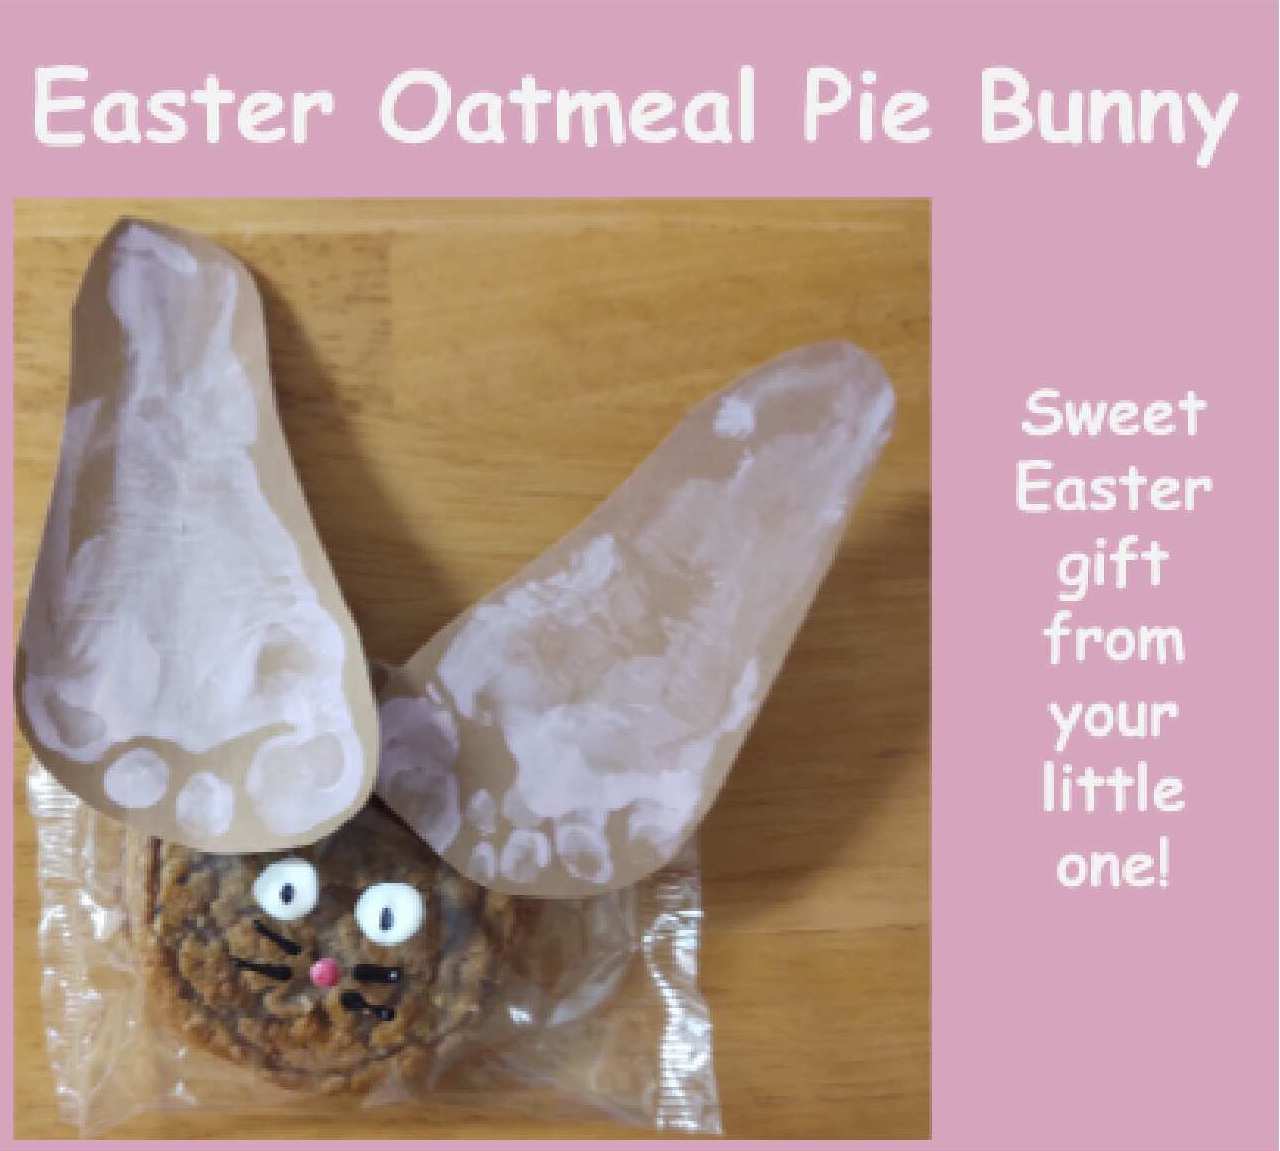 Easter Oatmeal Pie Bunny Craft